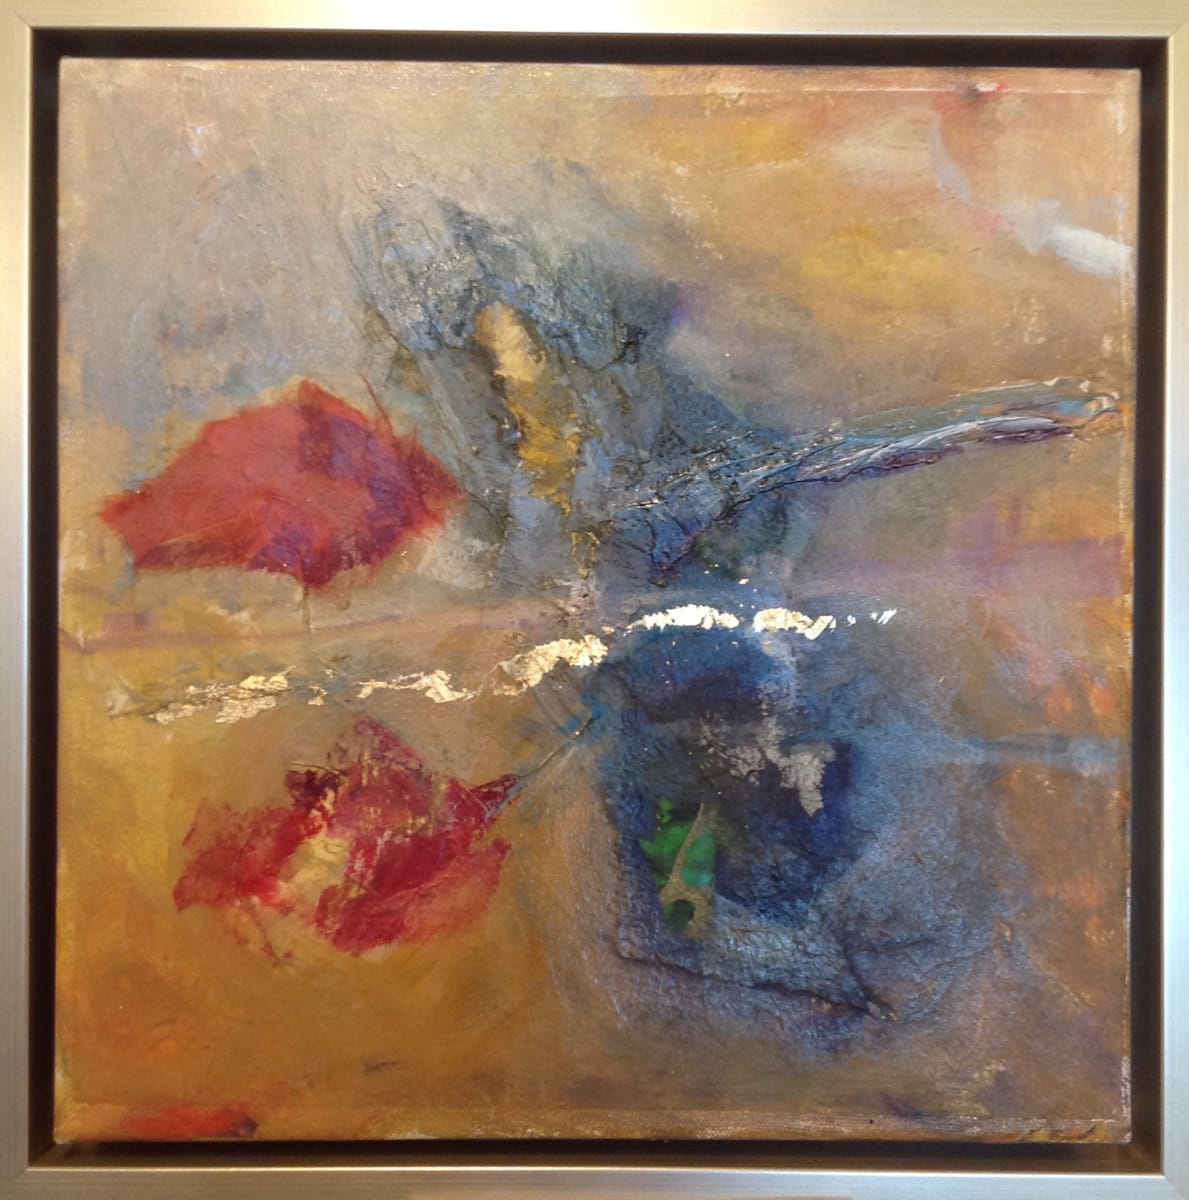 Reflected Rose with Gold Leaf by Mary Kamerer Impressionist Painting  Image: An abstracted rose--mixed media of papers, acrylics, oil paint, and gold leaf.  Framed in a natural wood floating frame. 